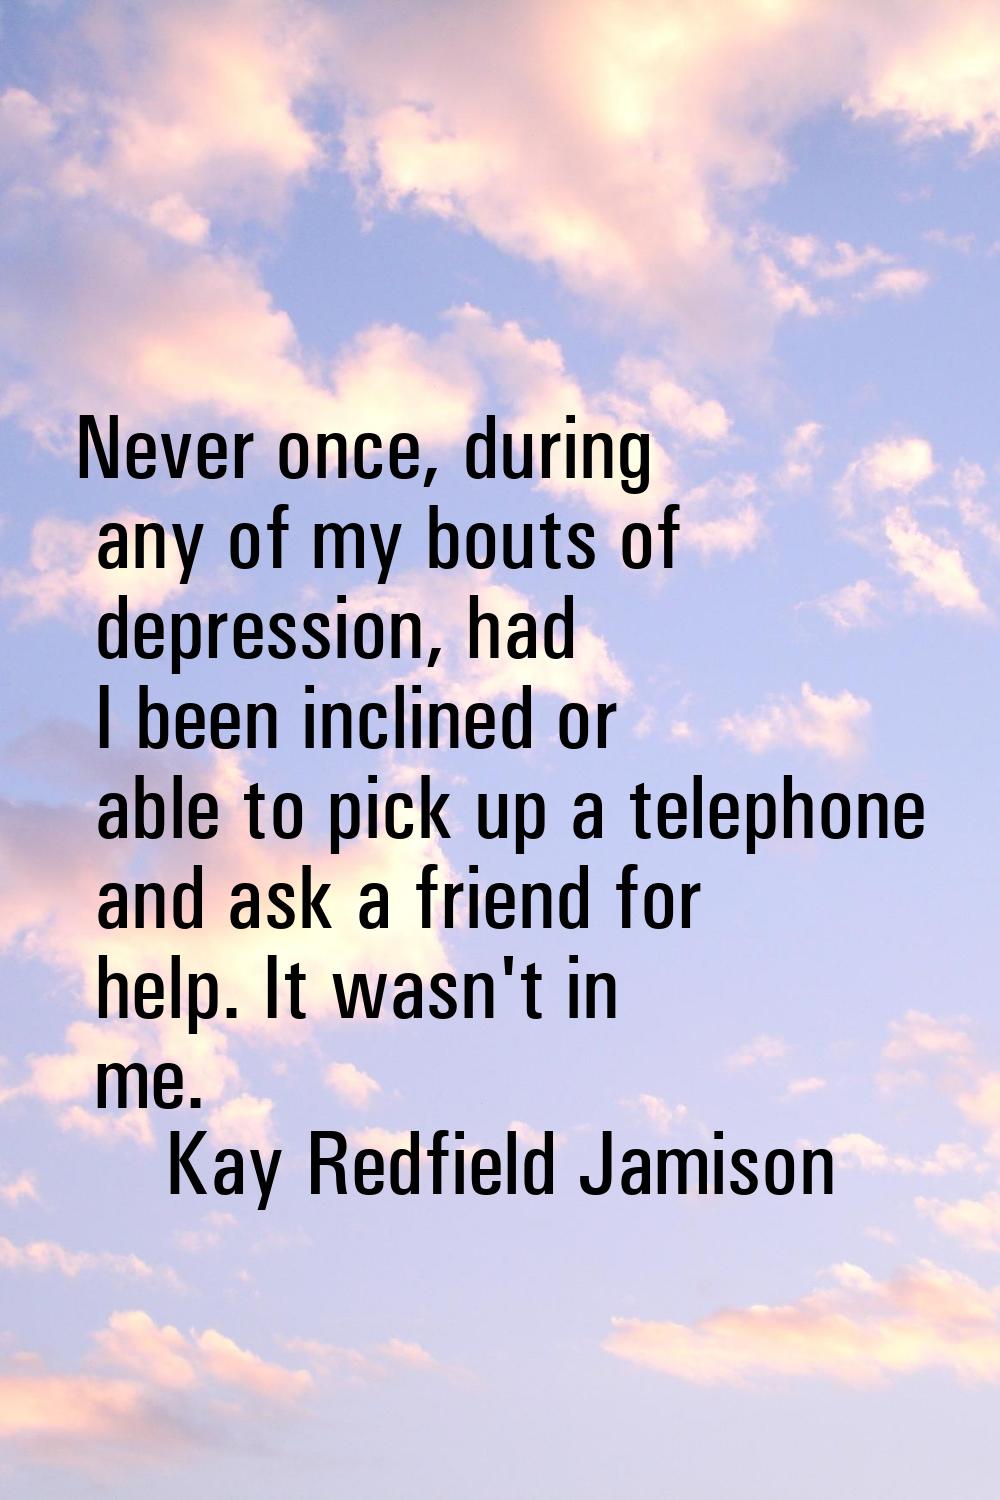 Never once, during any of my bouts of depression, had I been inclined or able to pick up a telephon